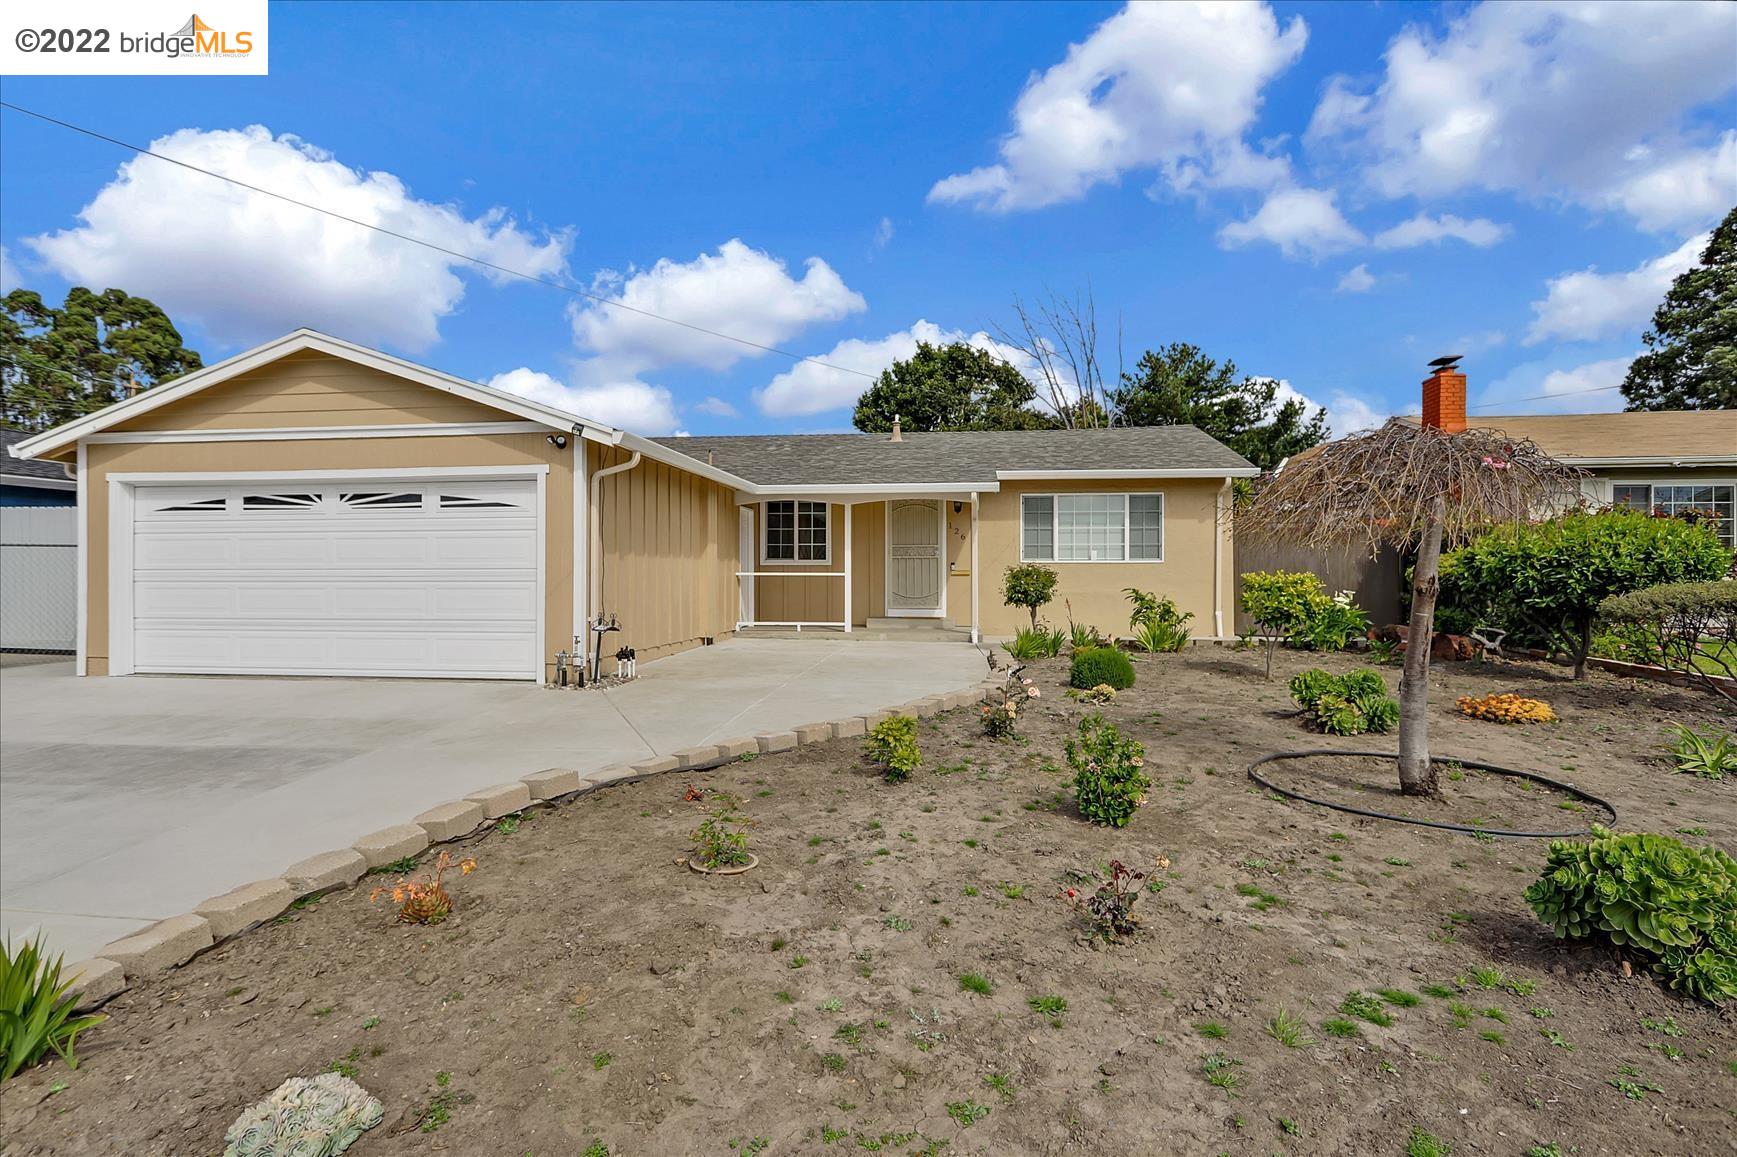 Photo of 126 O'rourke Dr in San Pablo, CA